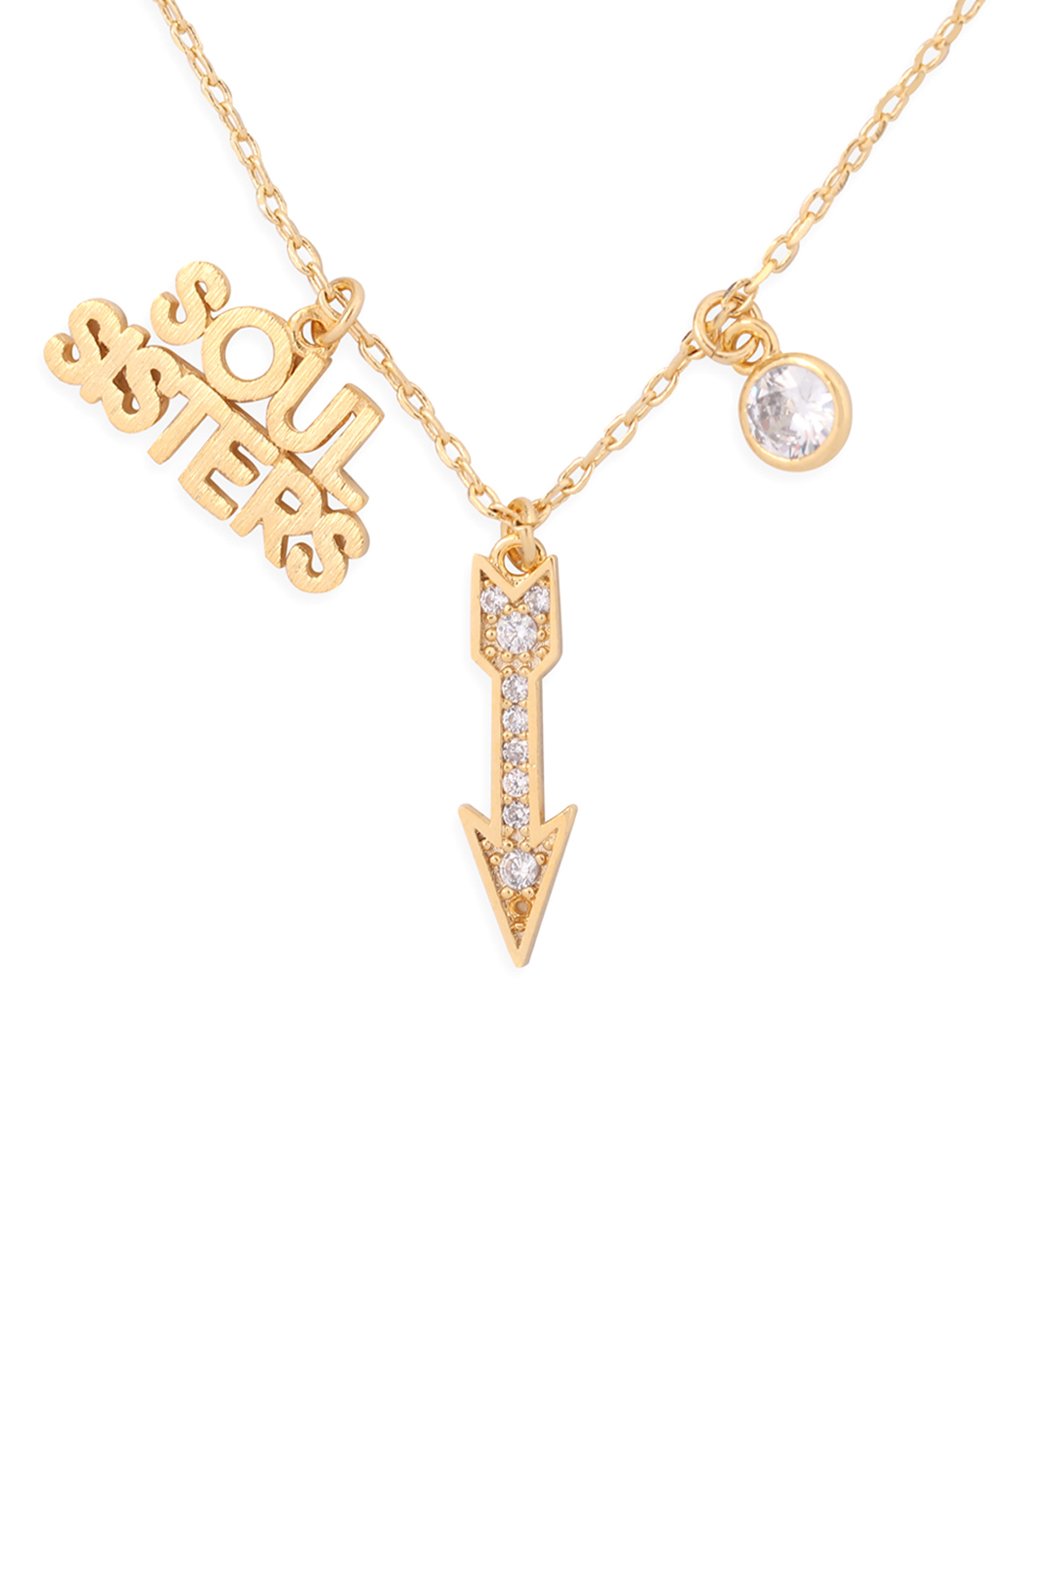 Hdnfn381 - Soul Sisters Arrow Cubic Zirconia Pendant Necklace - LOLA LUXE